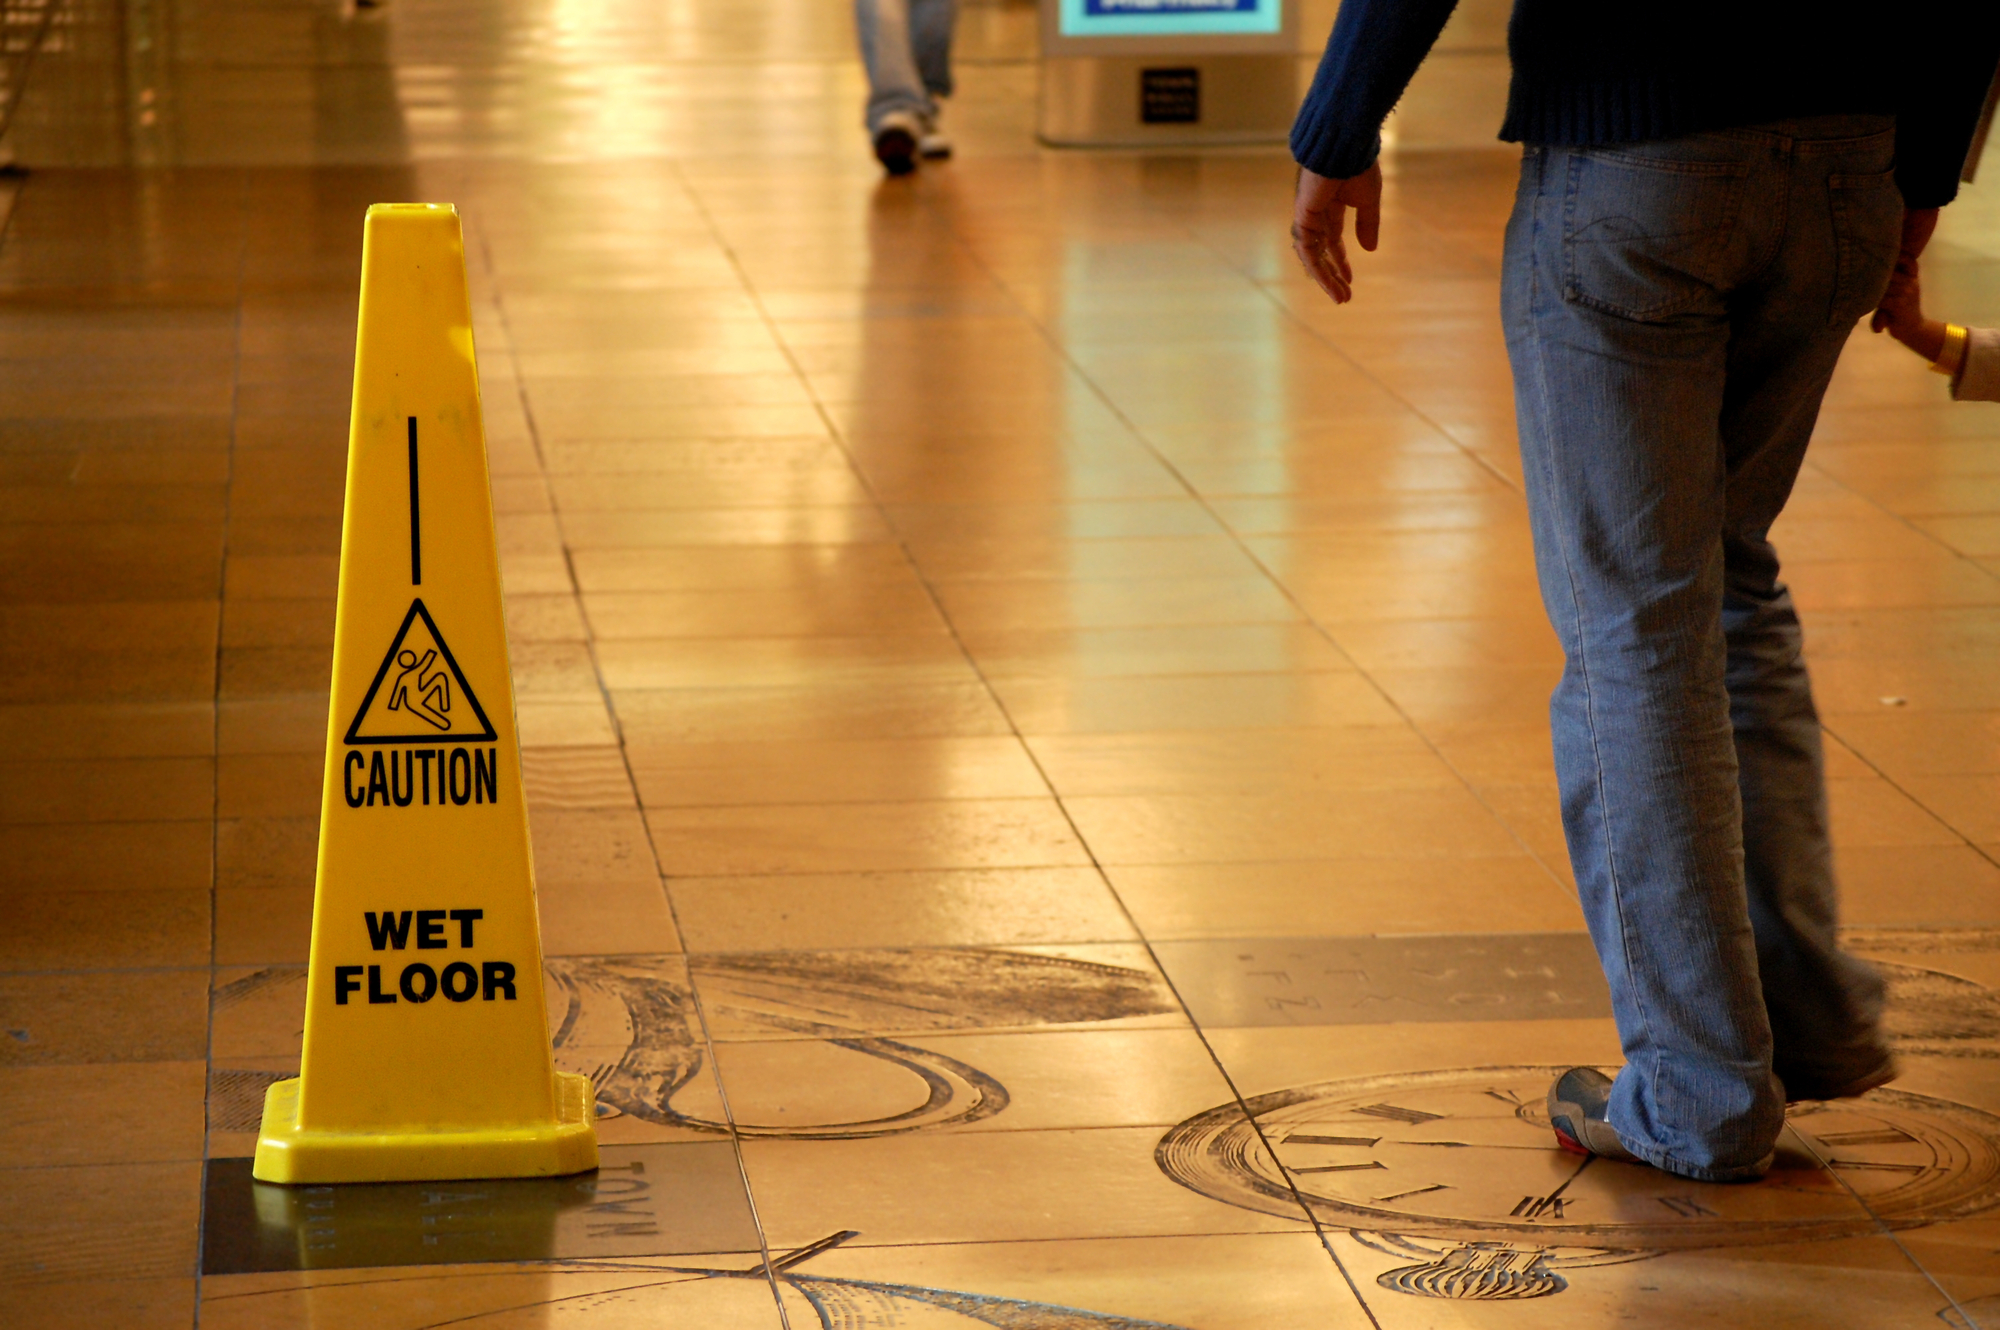 Wet floor sign - Tampa slip and fall personal accident lawyers